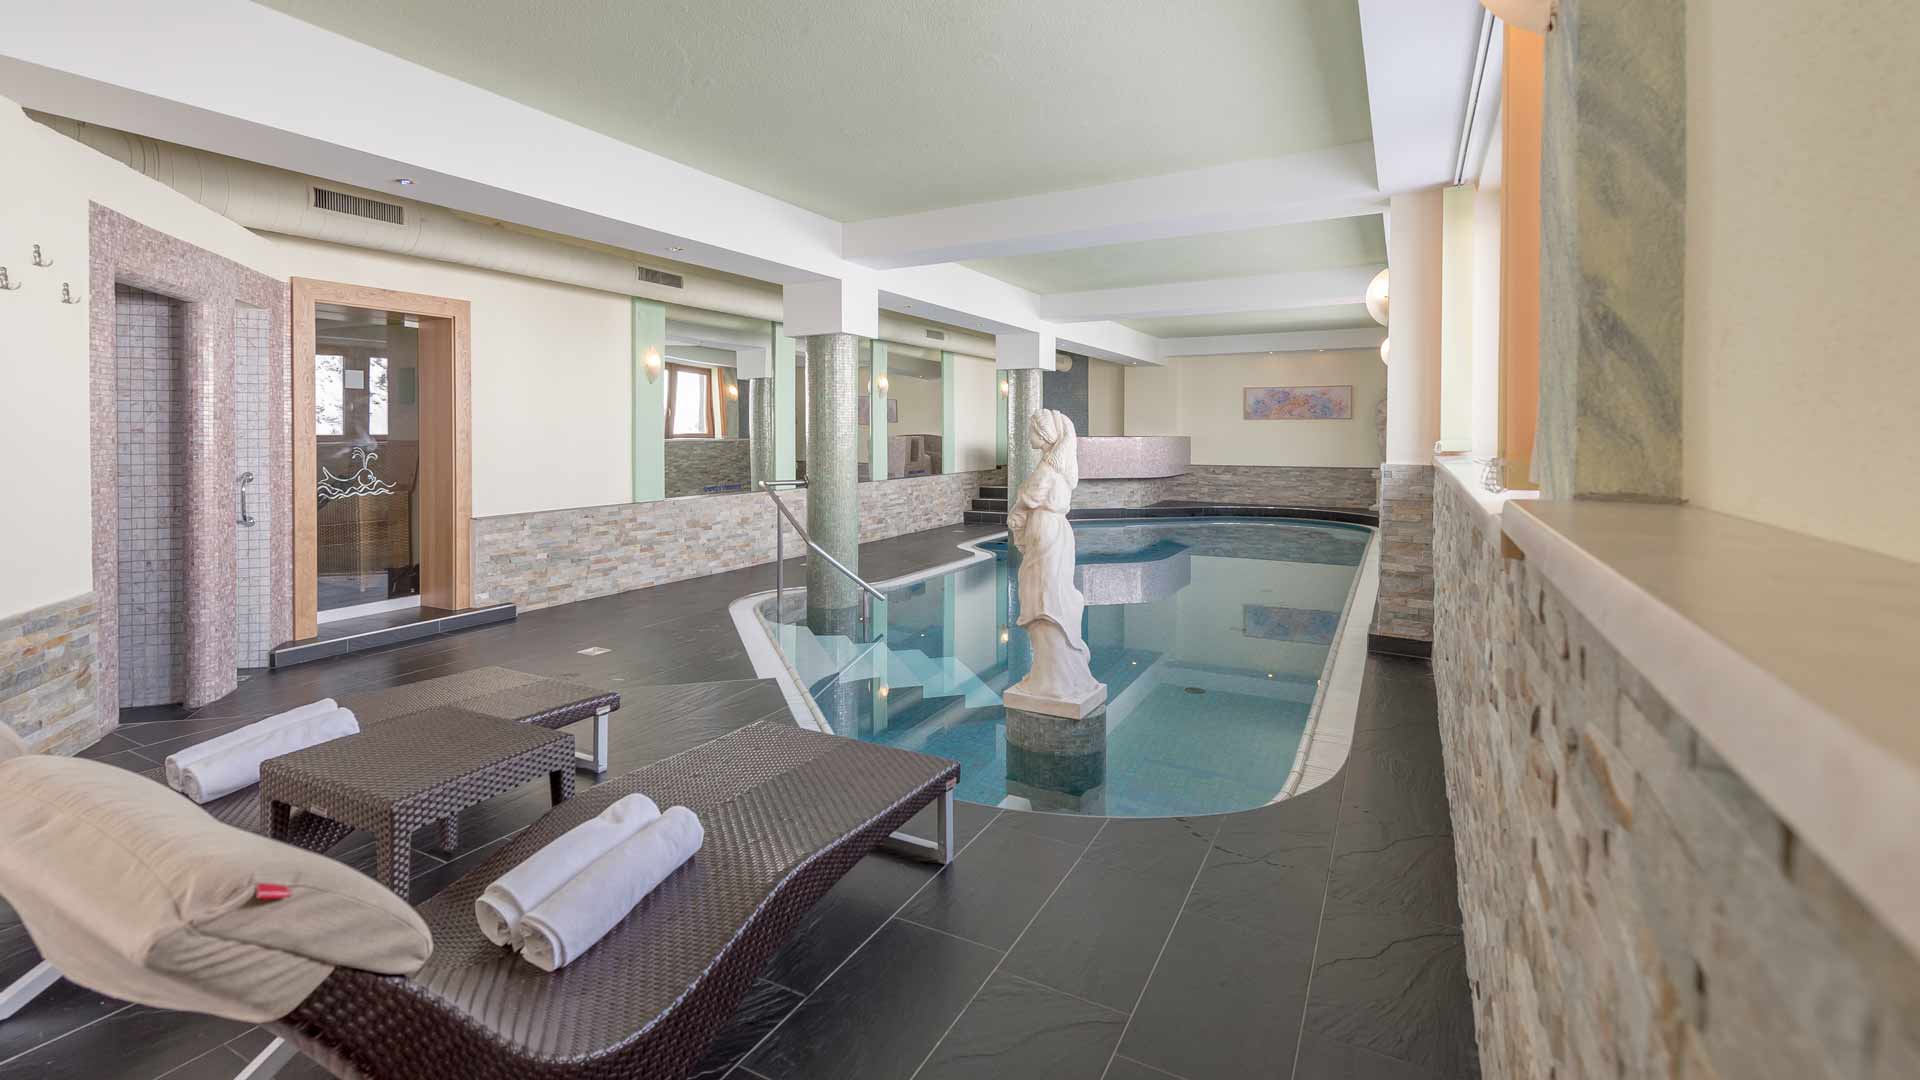 The indoor swimming pool